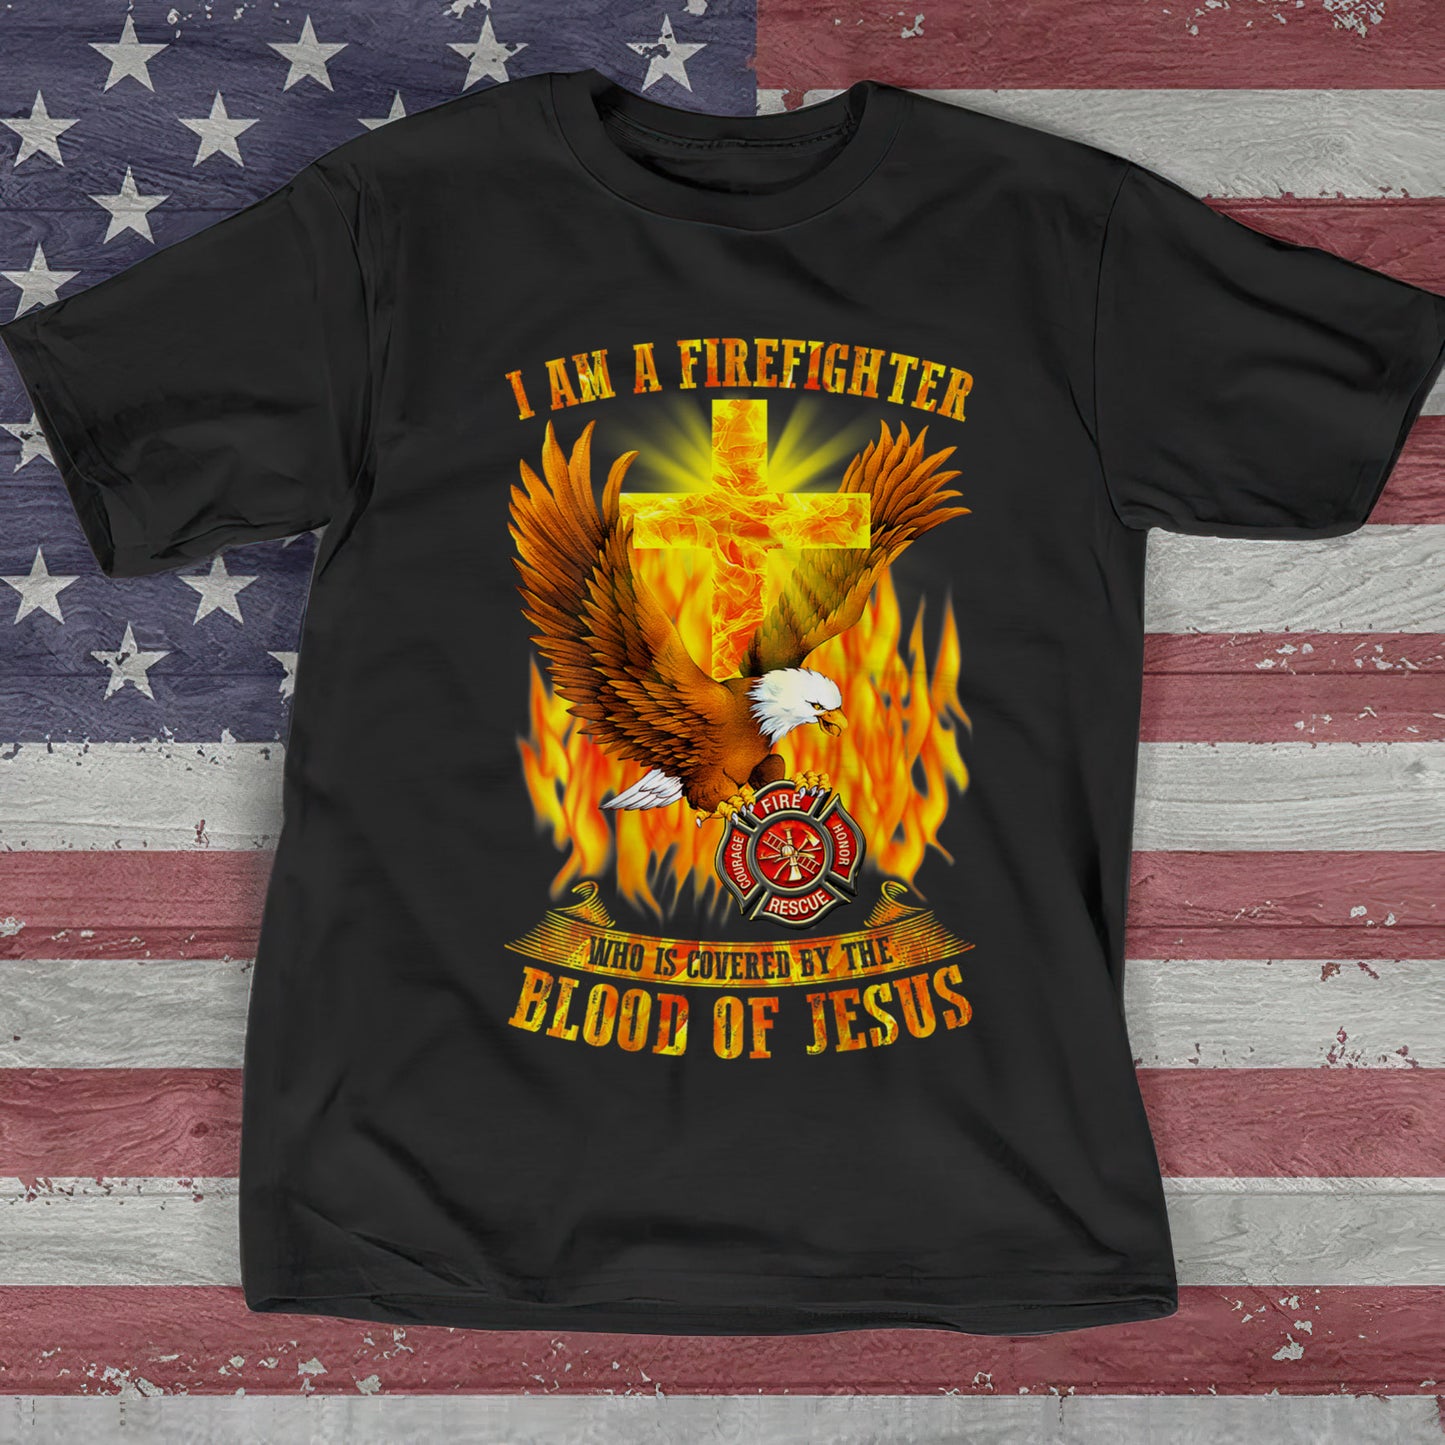 I Am A Firefighter Who Is Covered By The Blood Of Jesus - Engle And Cross - Cool Christian Shirts For Men & Women - Ciaocustom